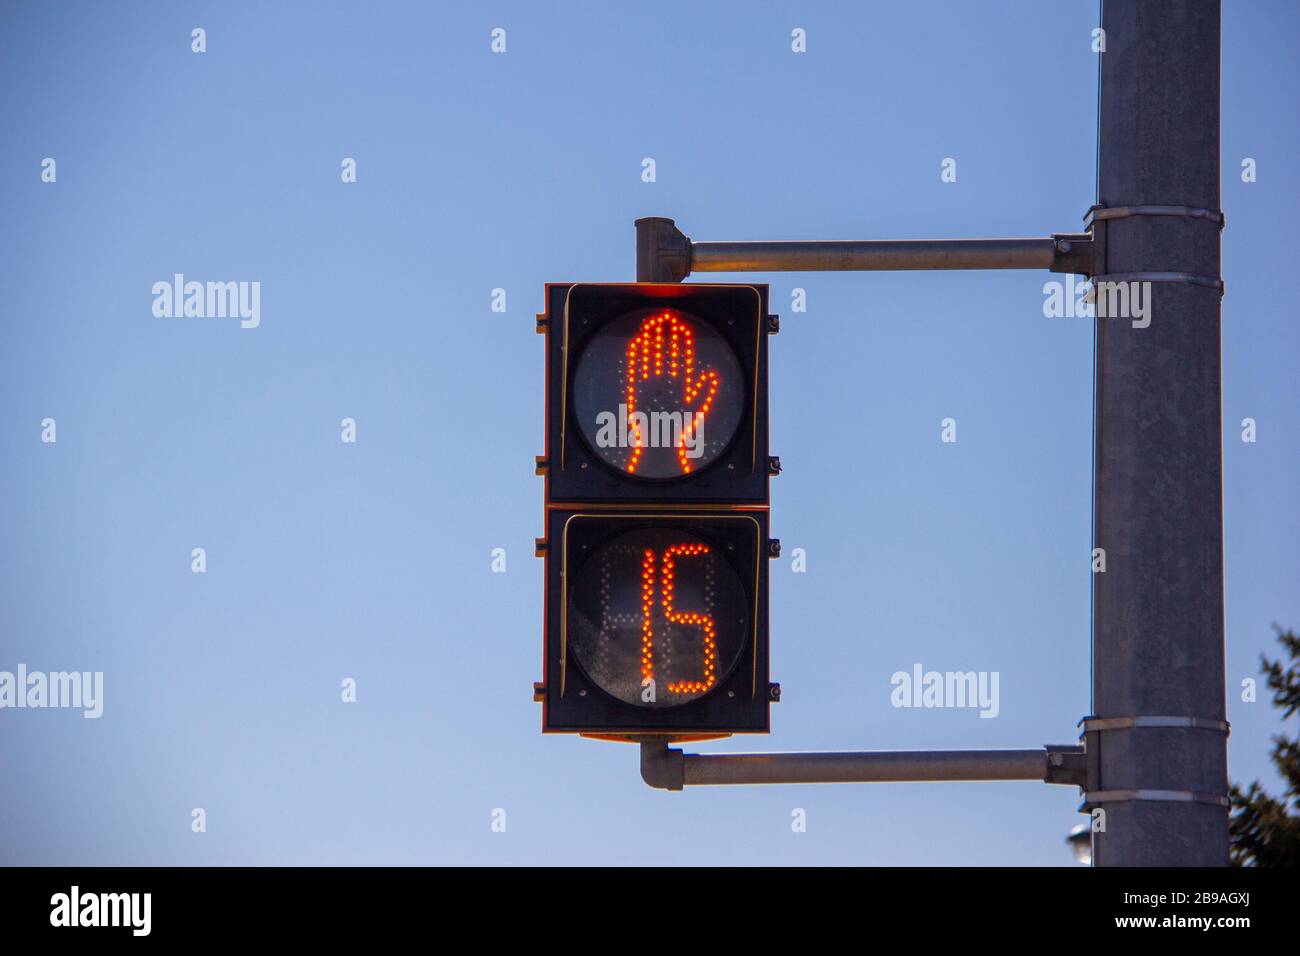 Pedestrian crossing light at 15 seconds Stock Photo